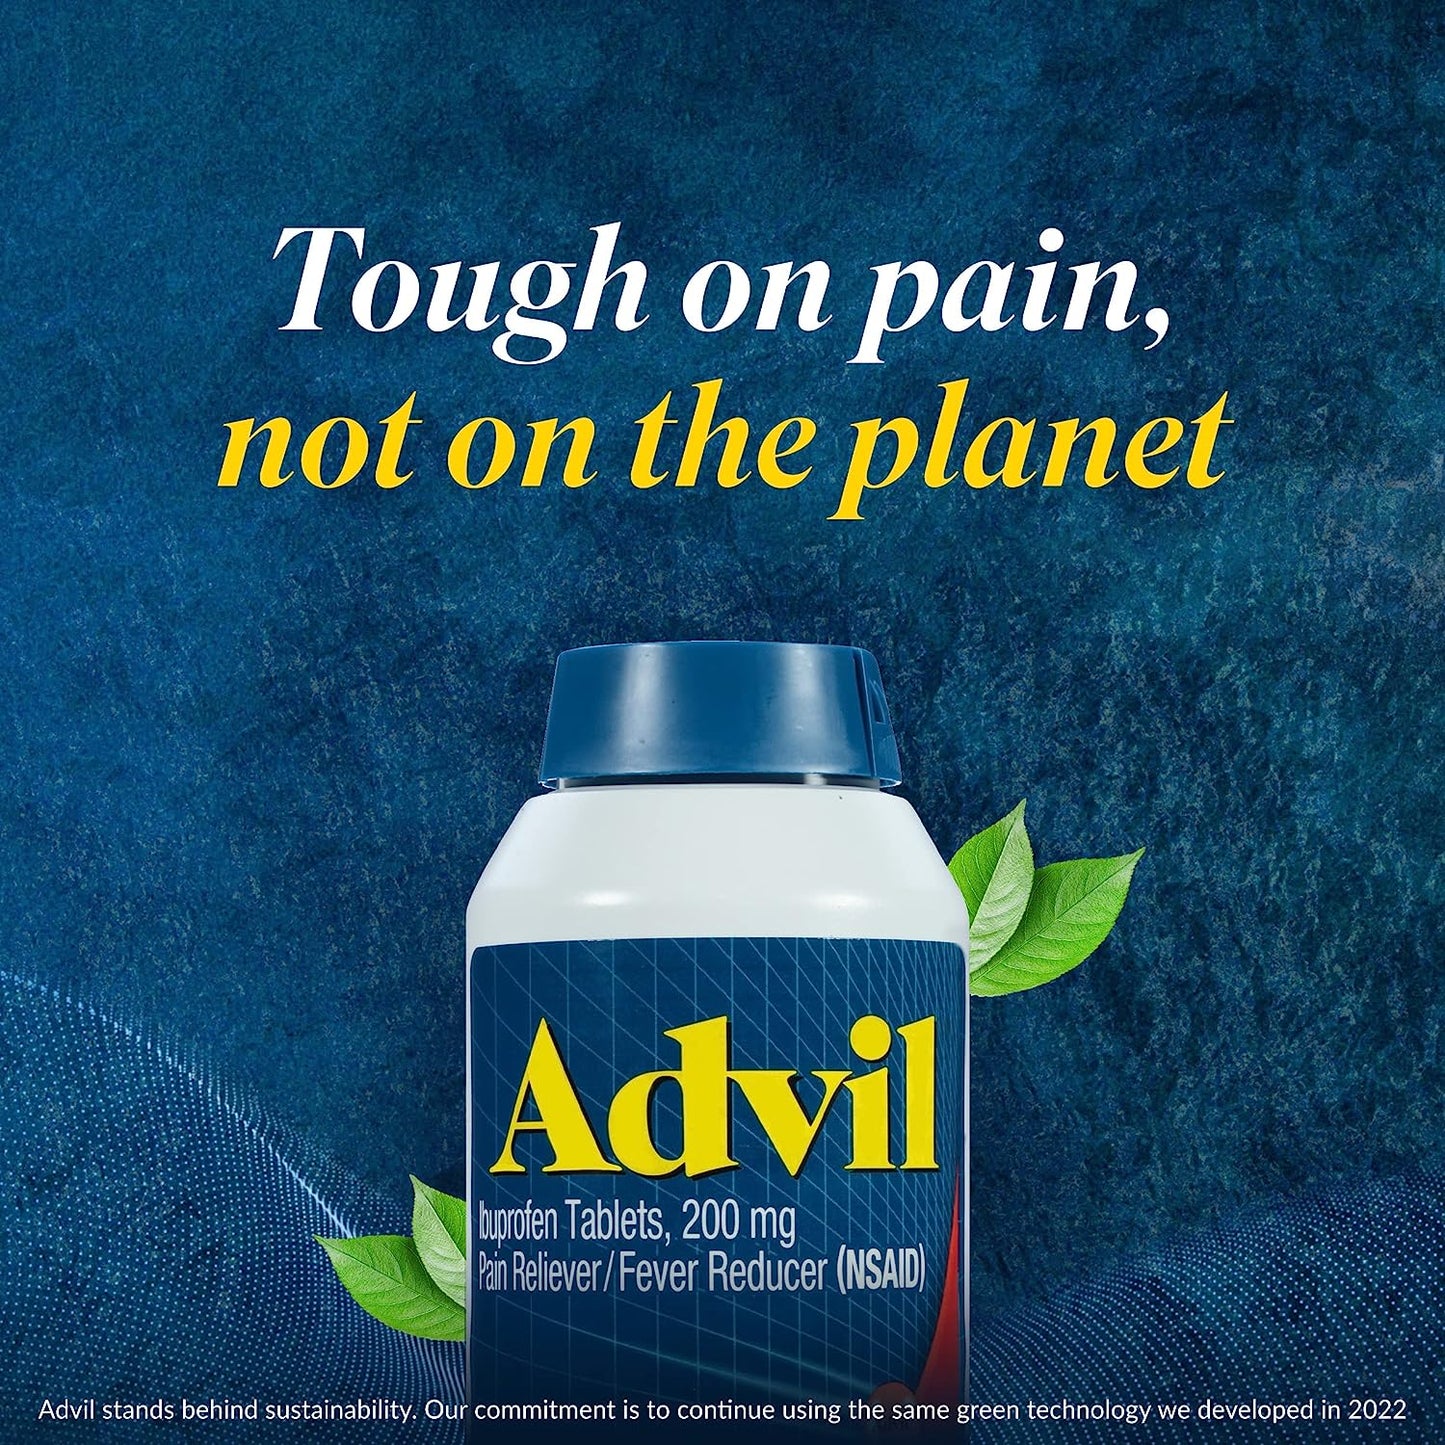 Advil Pain Reliever Medicine and Fever Reducer with Ibuprofen 200mg 300 Coated Tablets